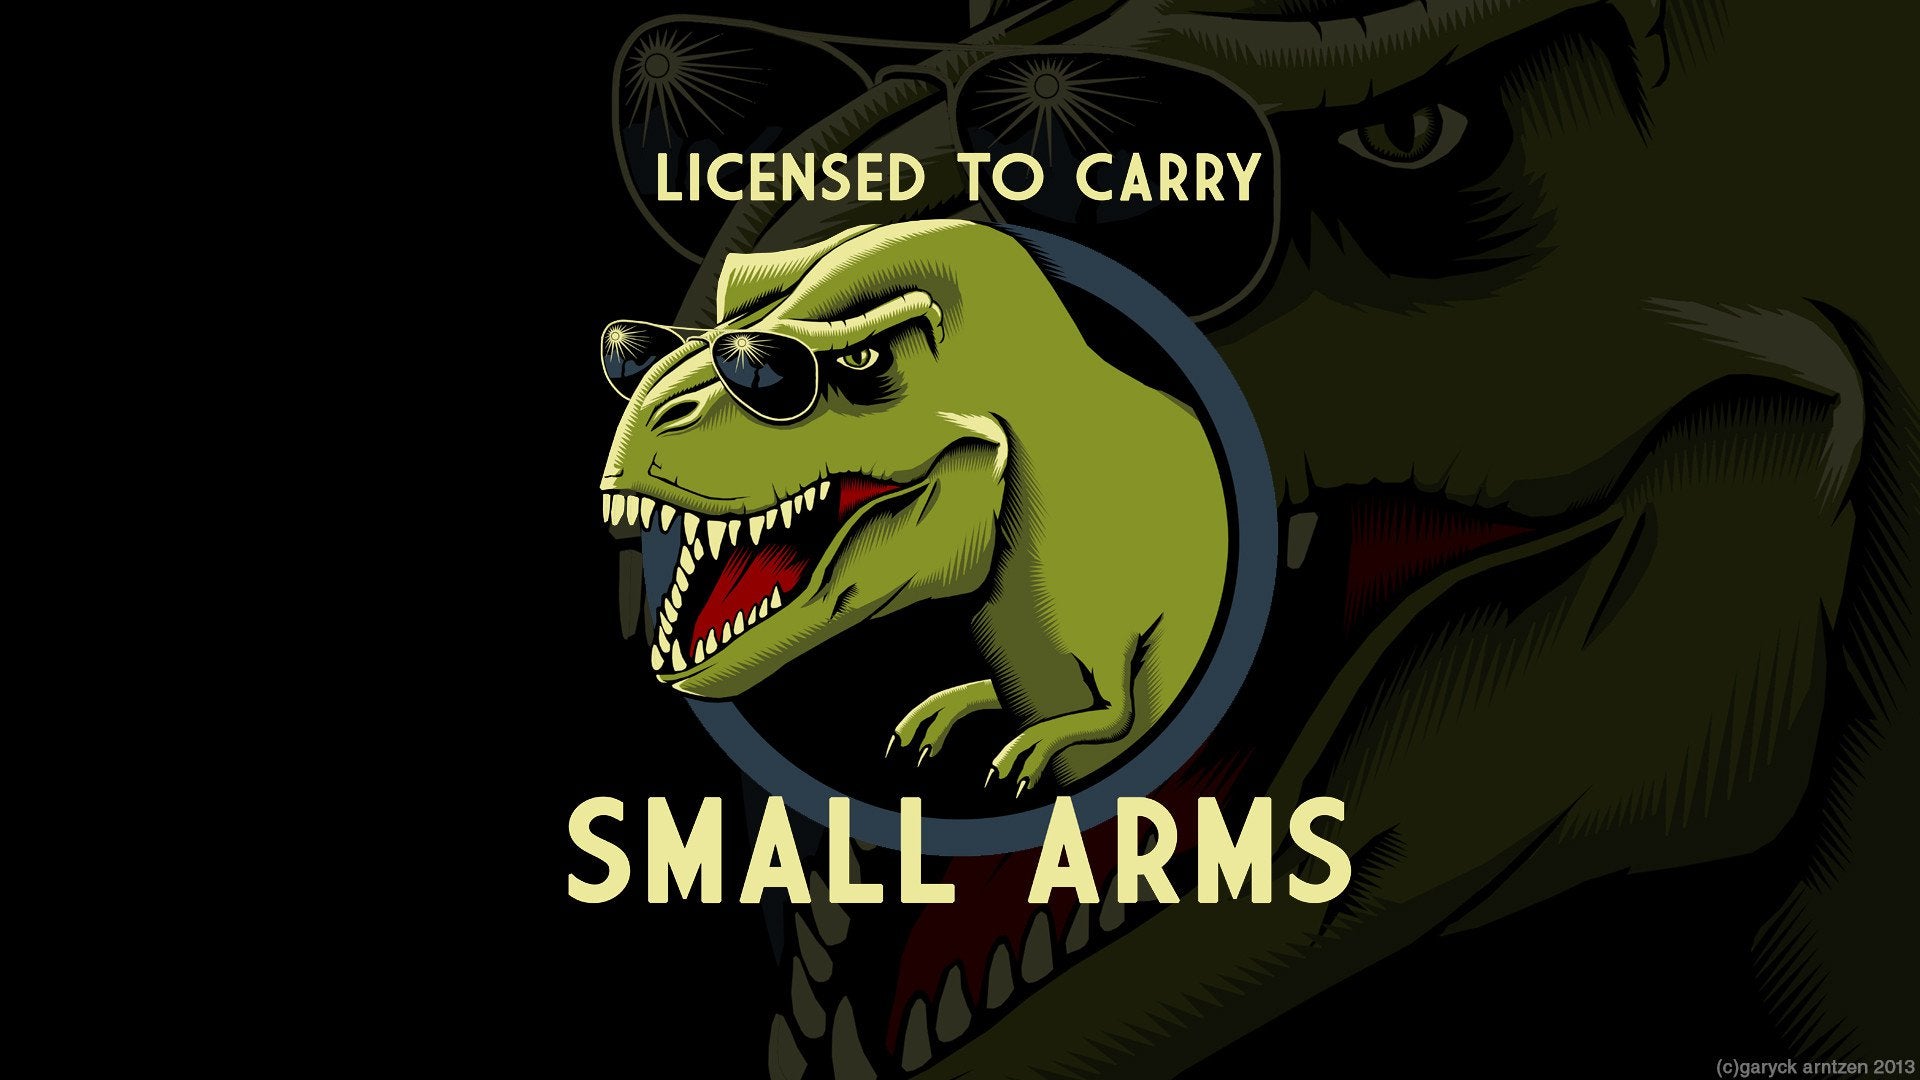 Dino Art Wallpaper: T Rex Licensed To Carry Small Arms: Dinosaurs